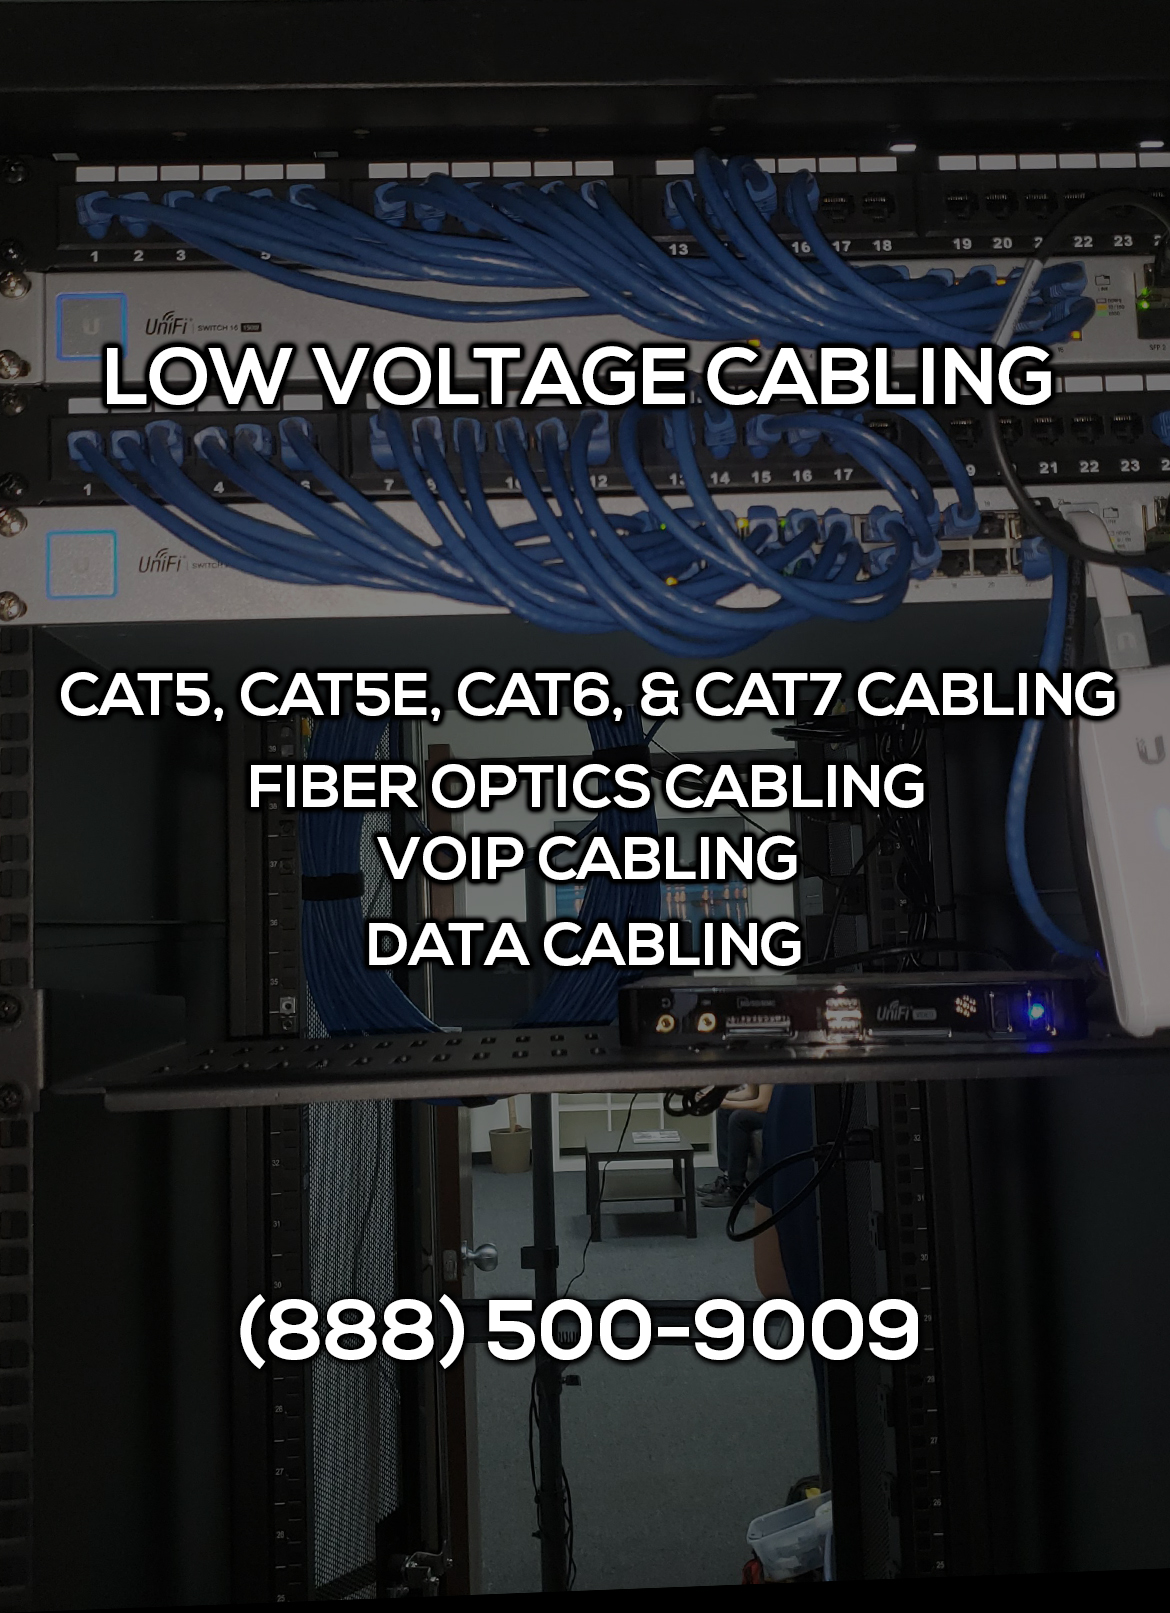 Low Voltage Cabling in Long Beach